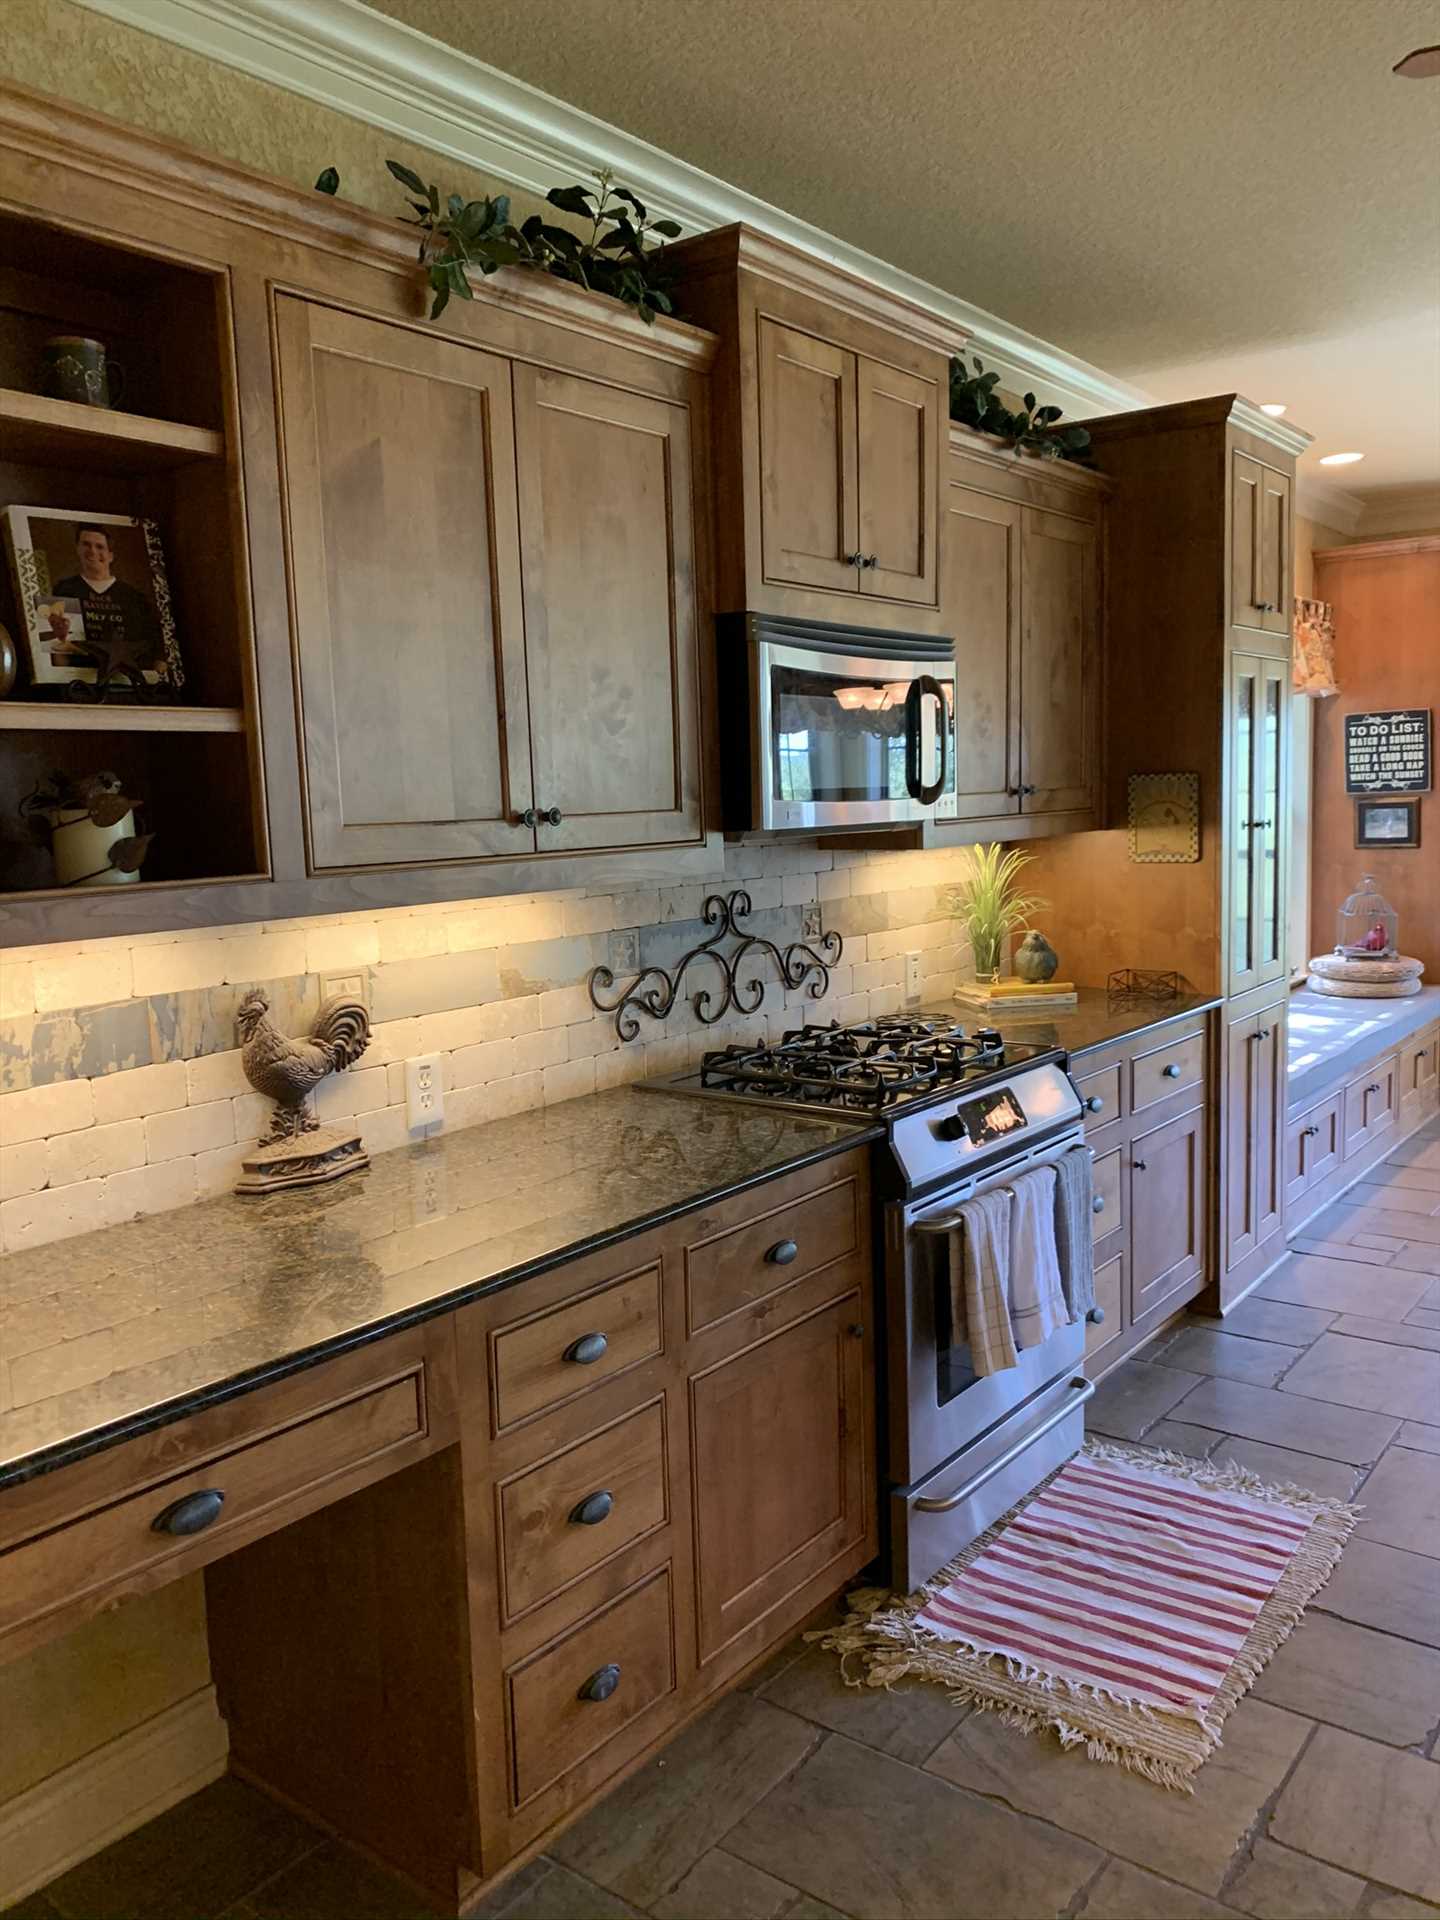                                                 Got more than one cook in your crew? There's no worry about bumping elbows with all this kitchen space!